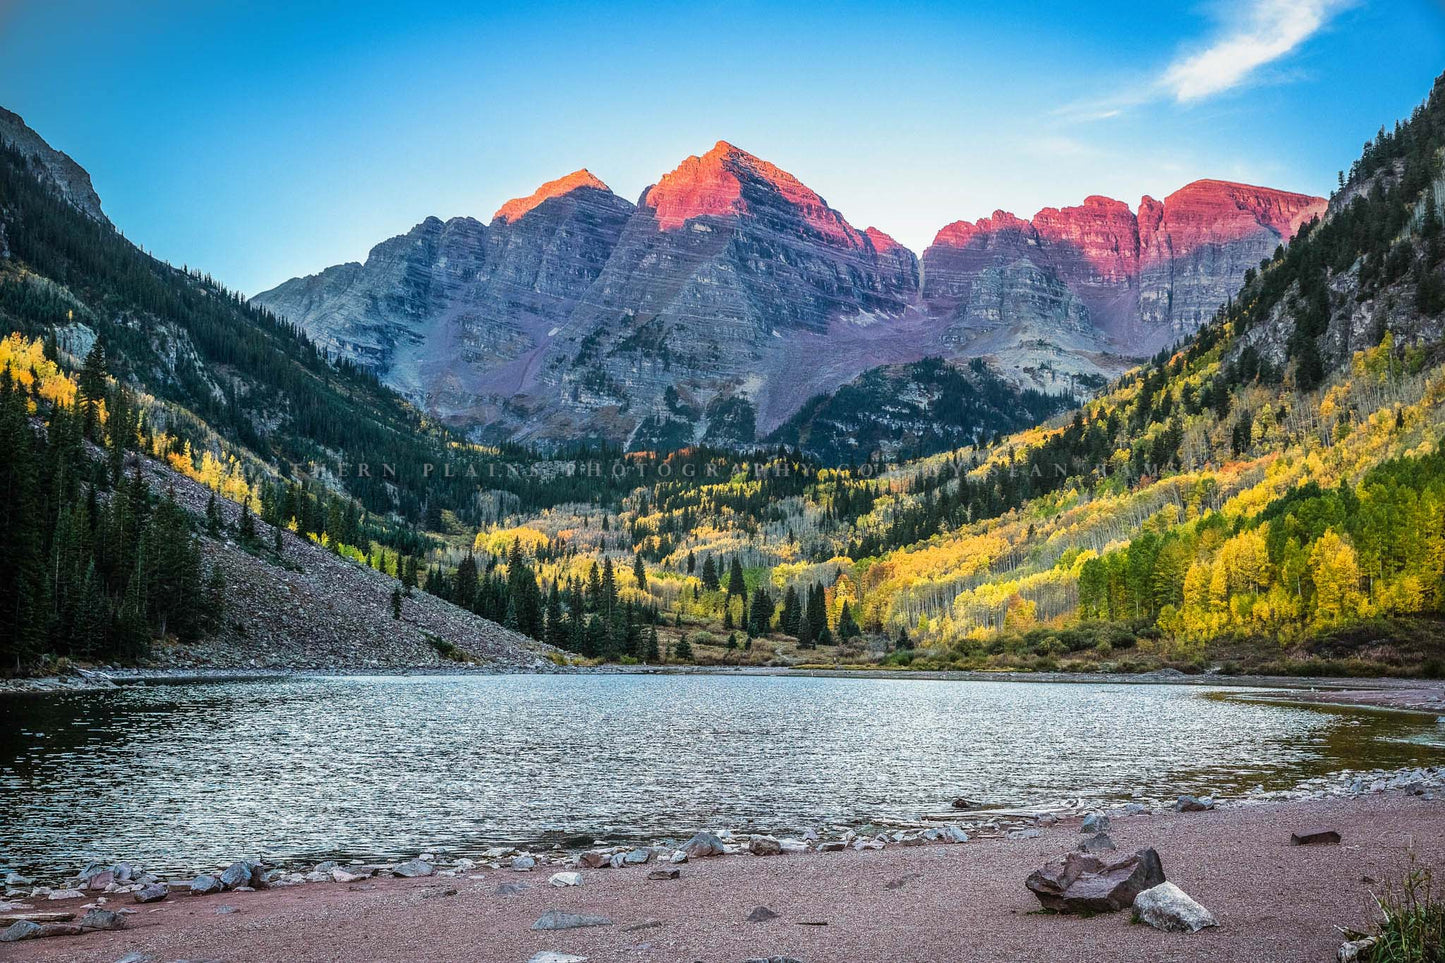 Rocky Mountain photography print of the Maroon Bells at sunrise on an autumn morning near Aspen, Colorado by Sean Ramsey of Southern Plains Photography.